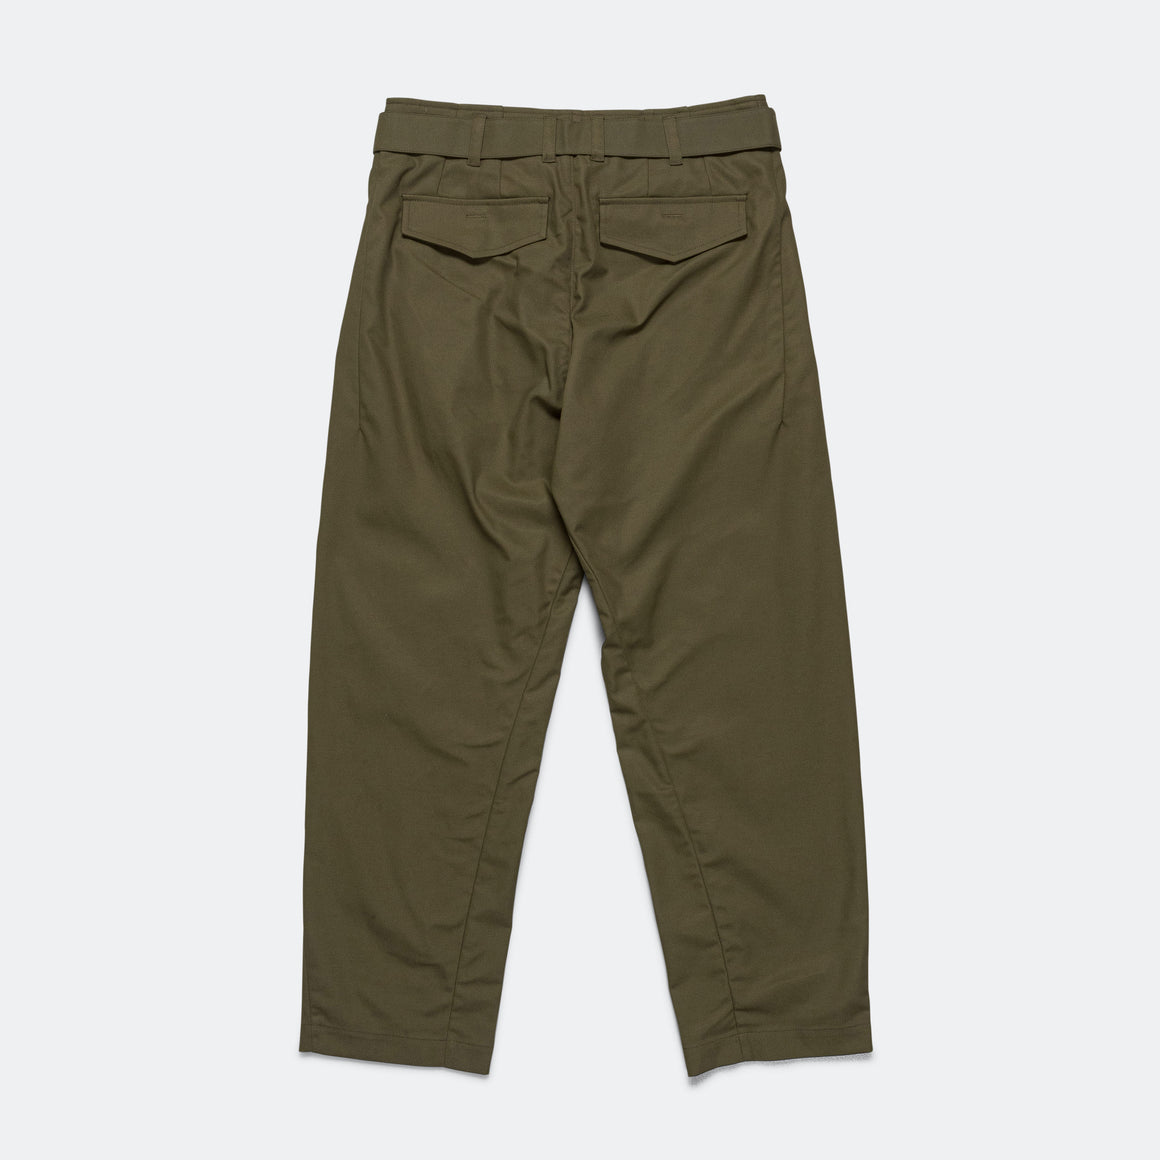 ESC Woven Worker Pant - Olive